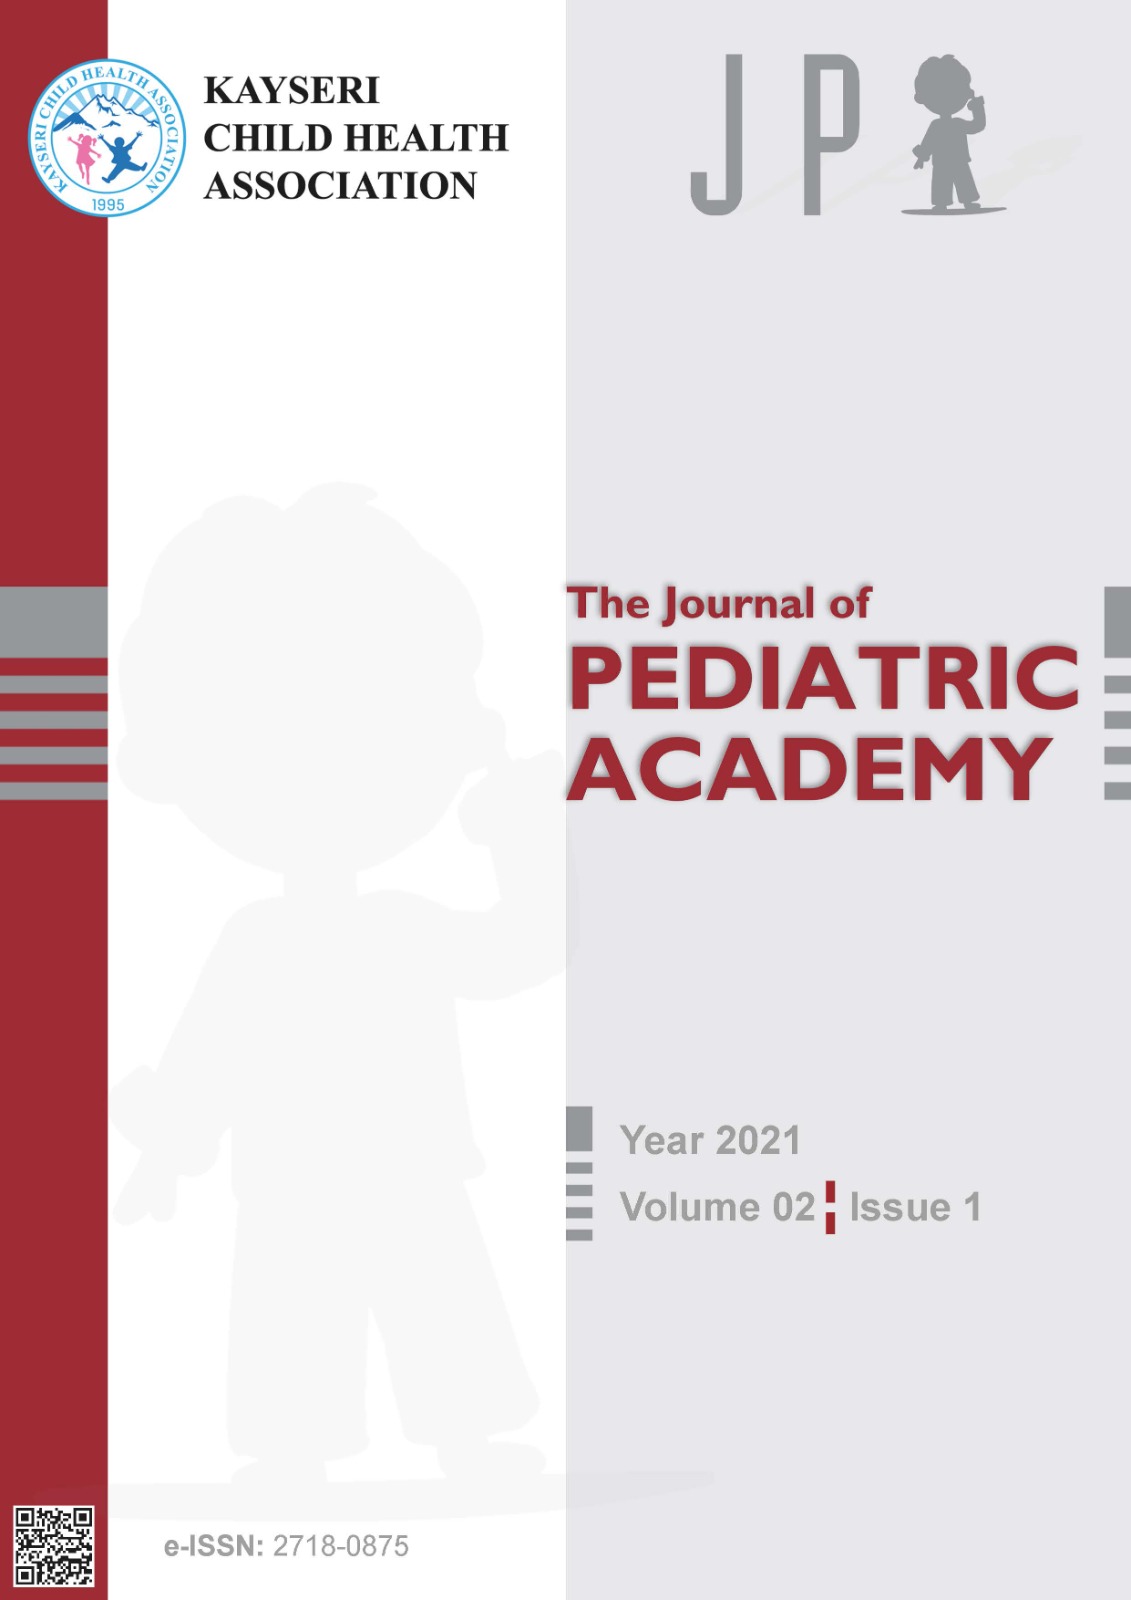 					View Vol. 2 No. 1 (2021): The Journal of Pediatric Academy
				